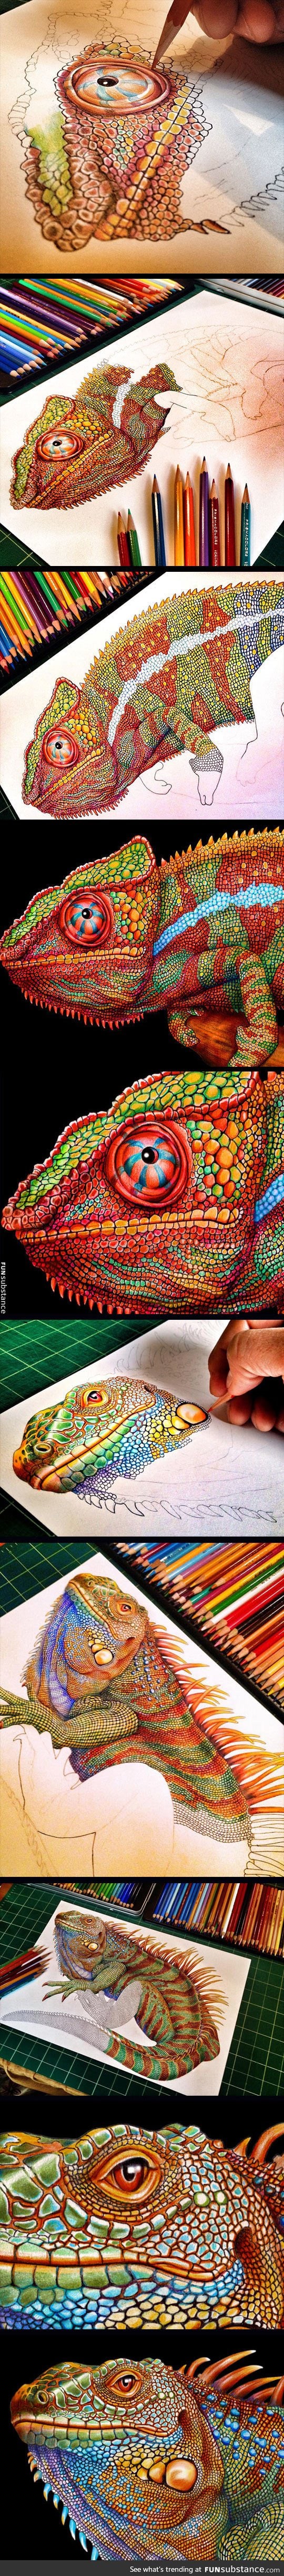 Incredibly detailed drawing of a chameleon